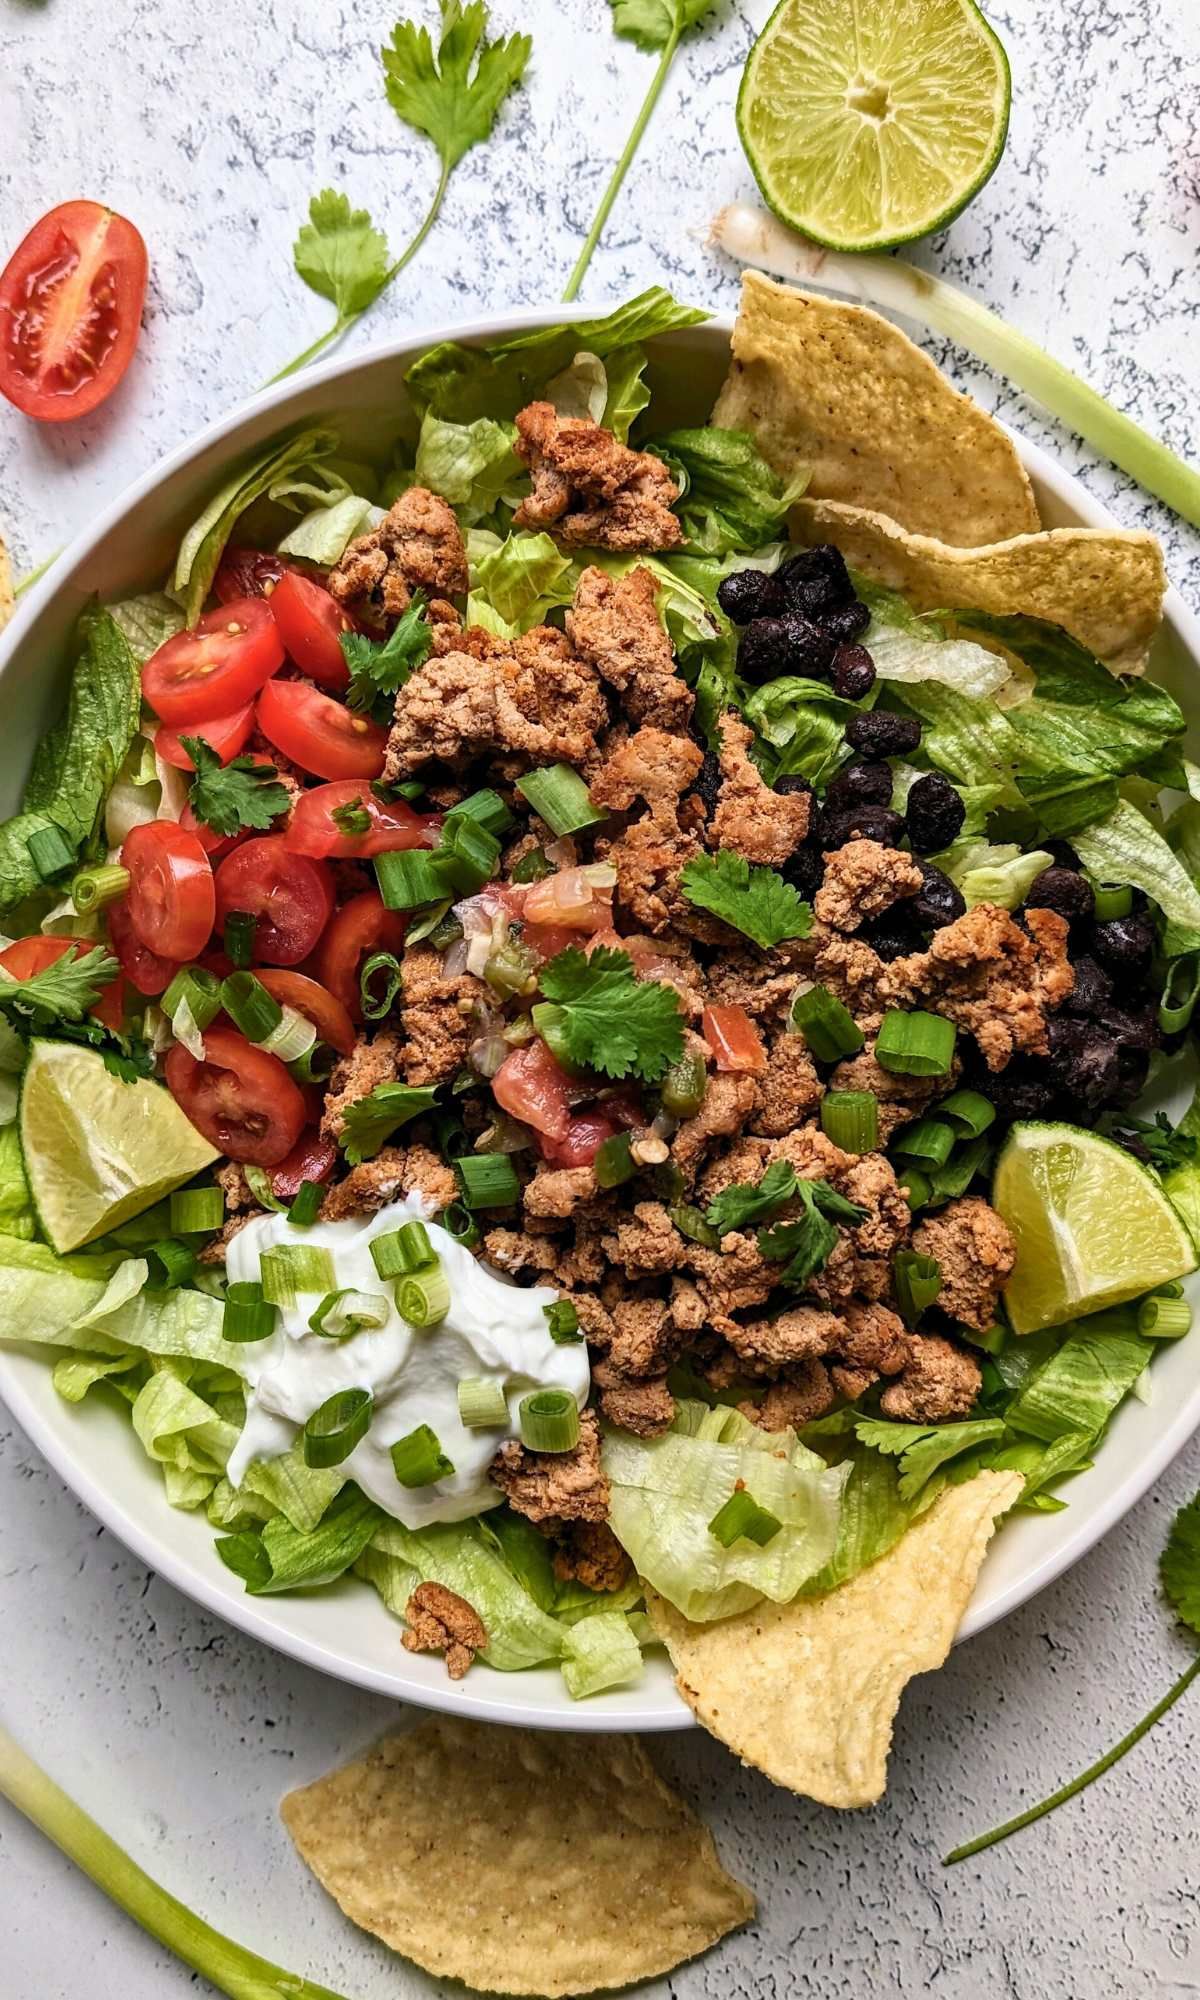 low salt taco salad recipe with no salt added taco meat and low sodium ingredients with fresh veggies 